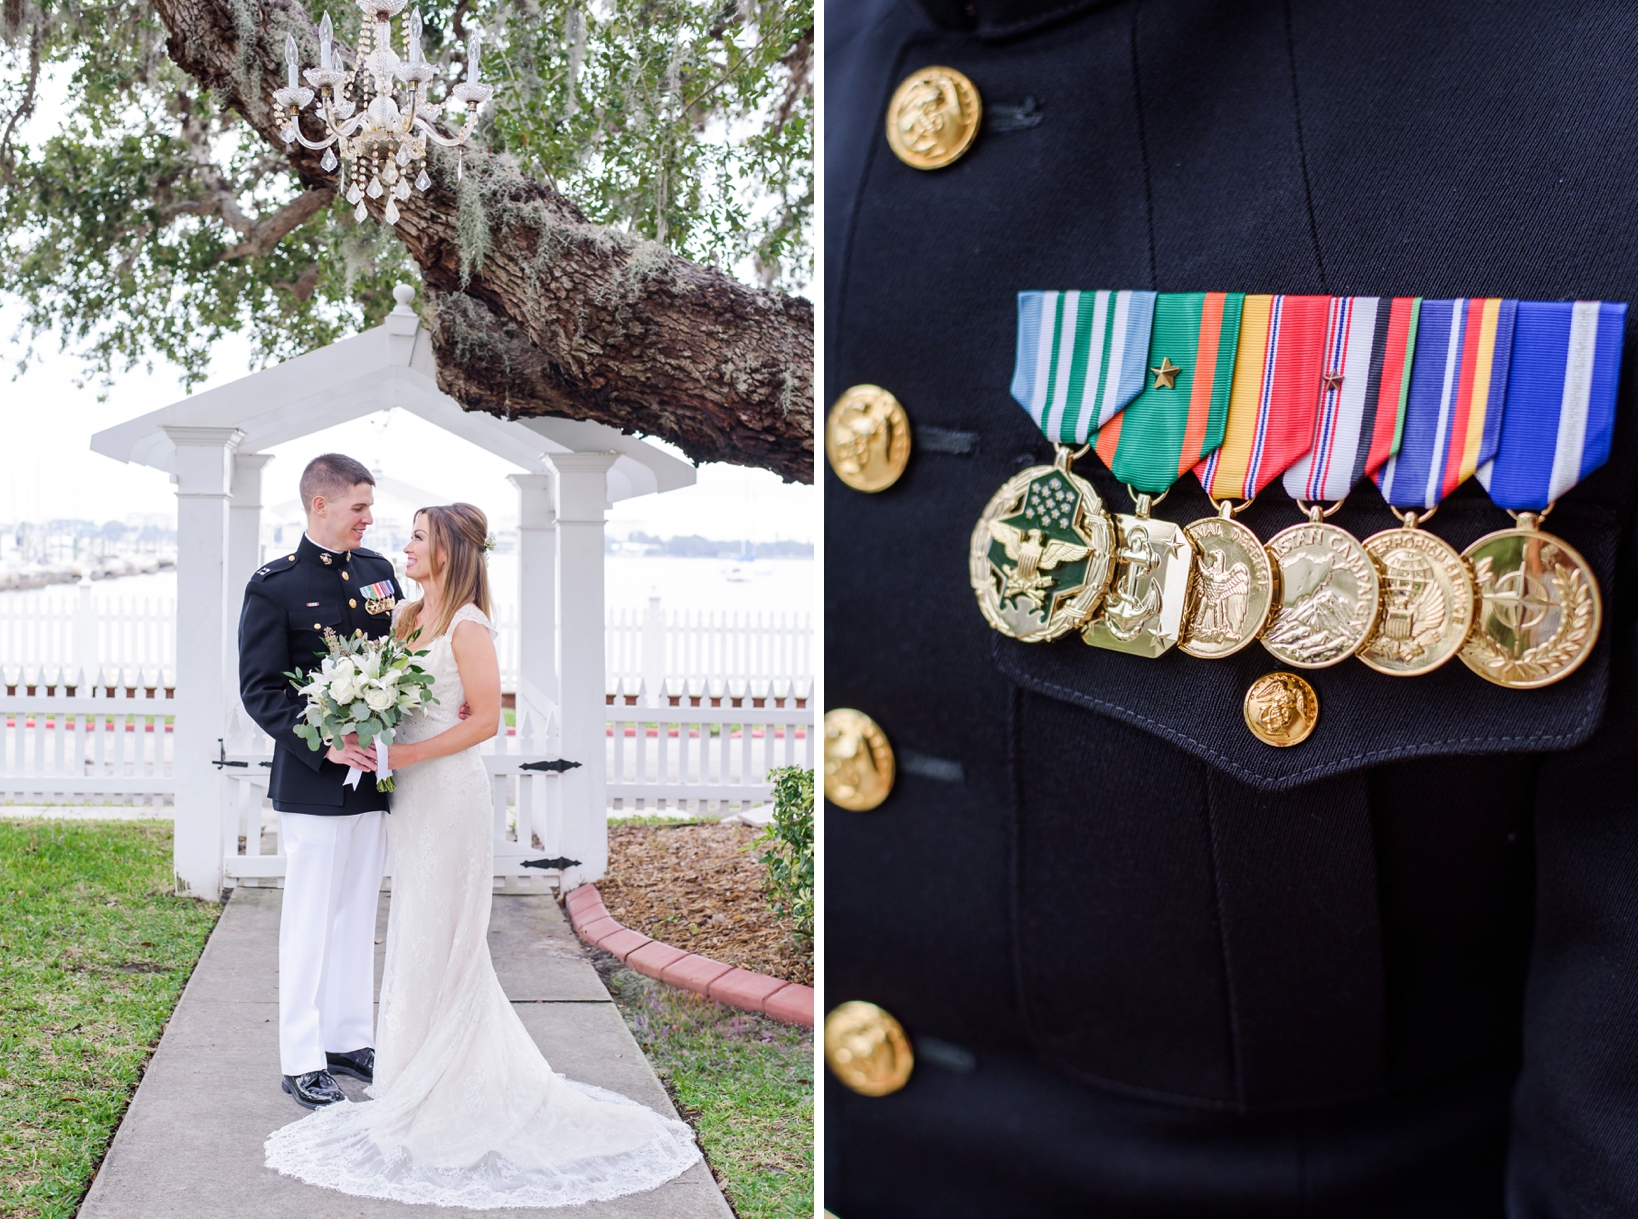 Bride and groom portrait and military medals on the groom's uniform